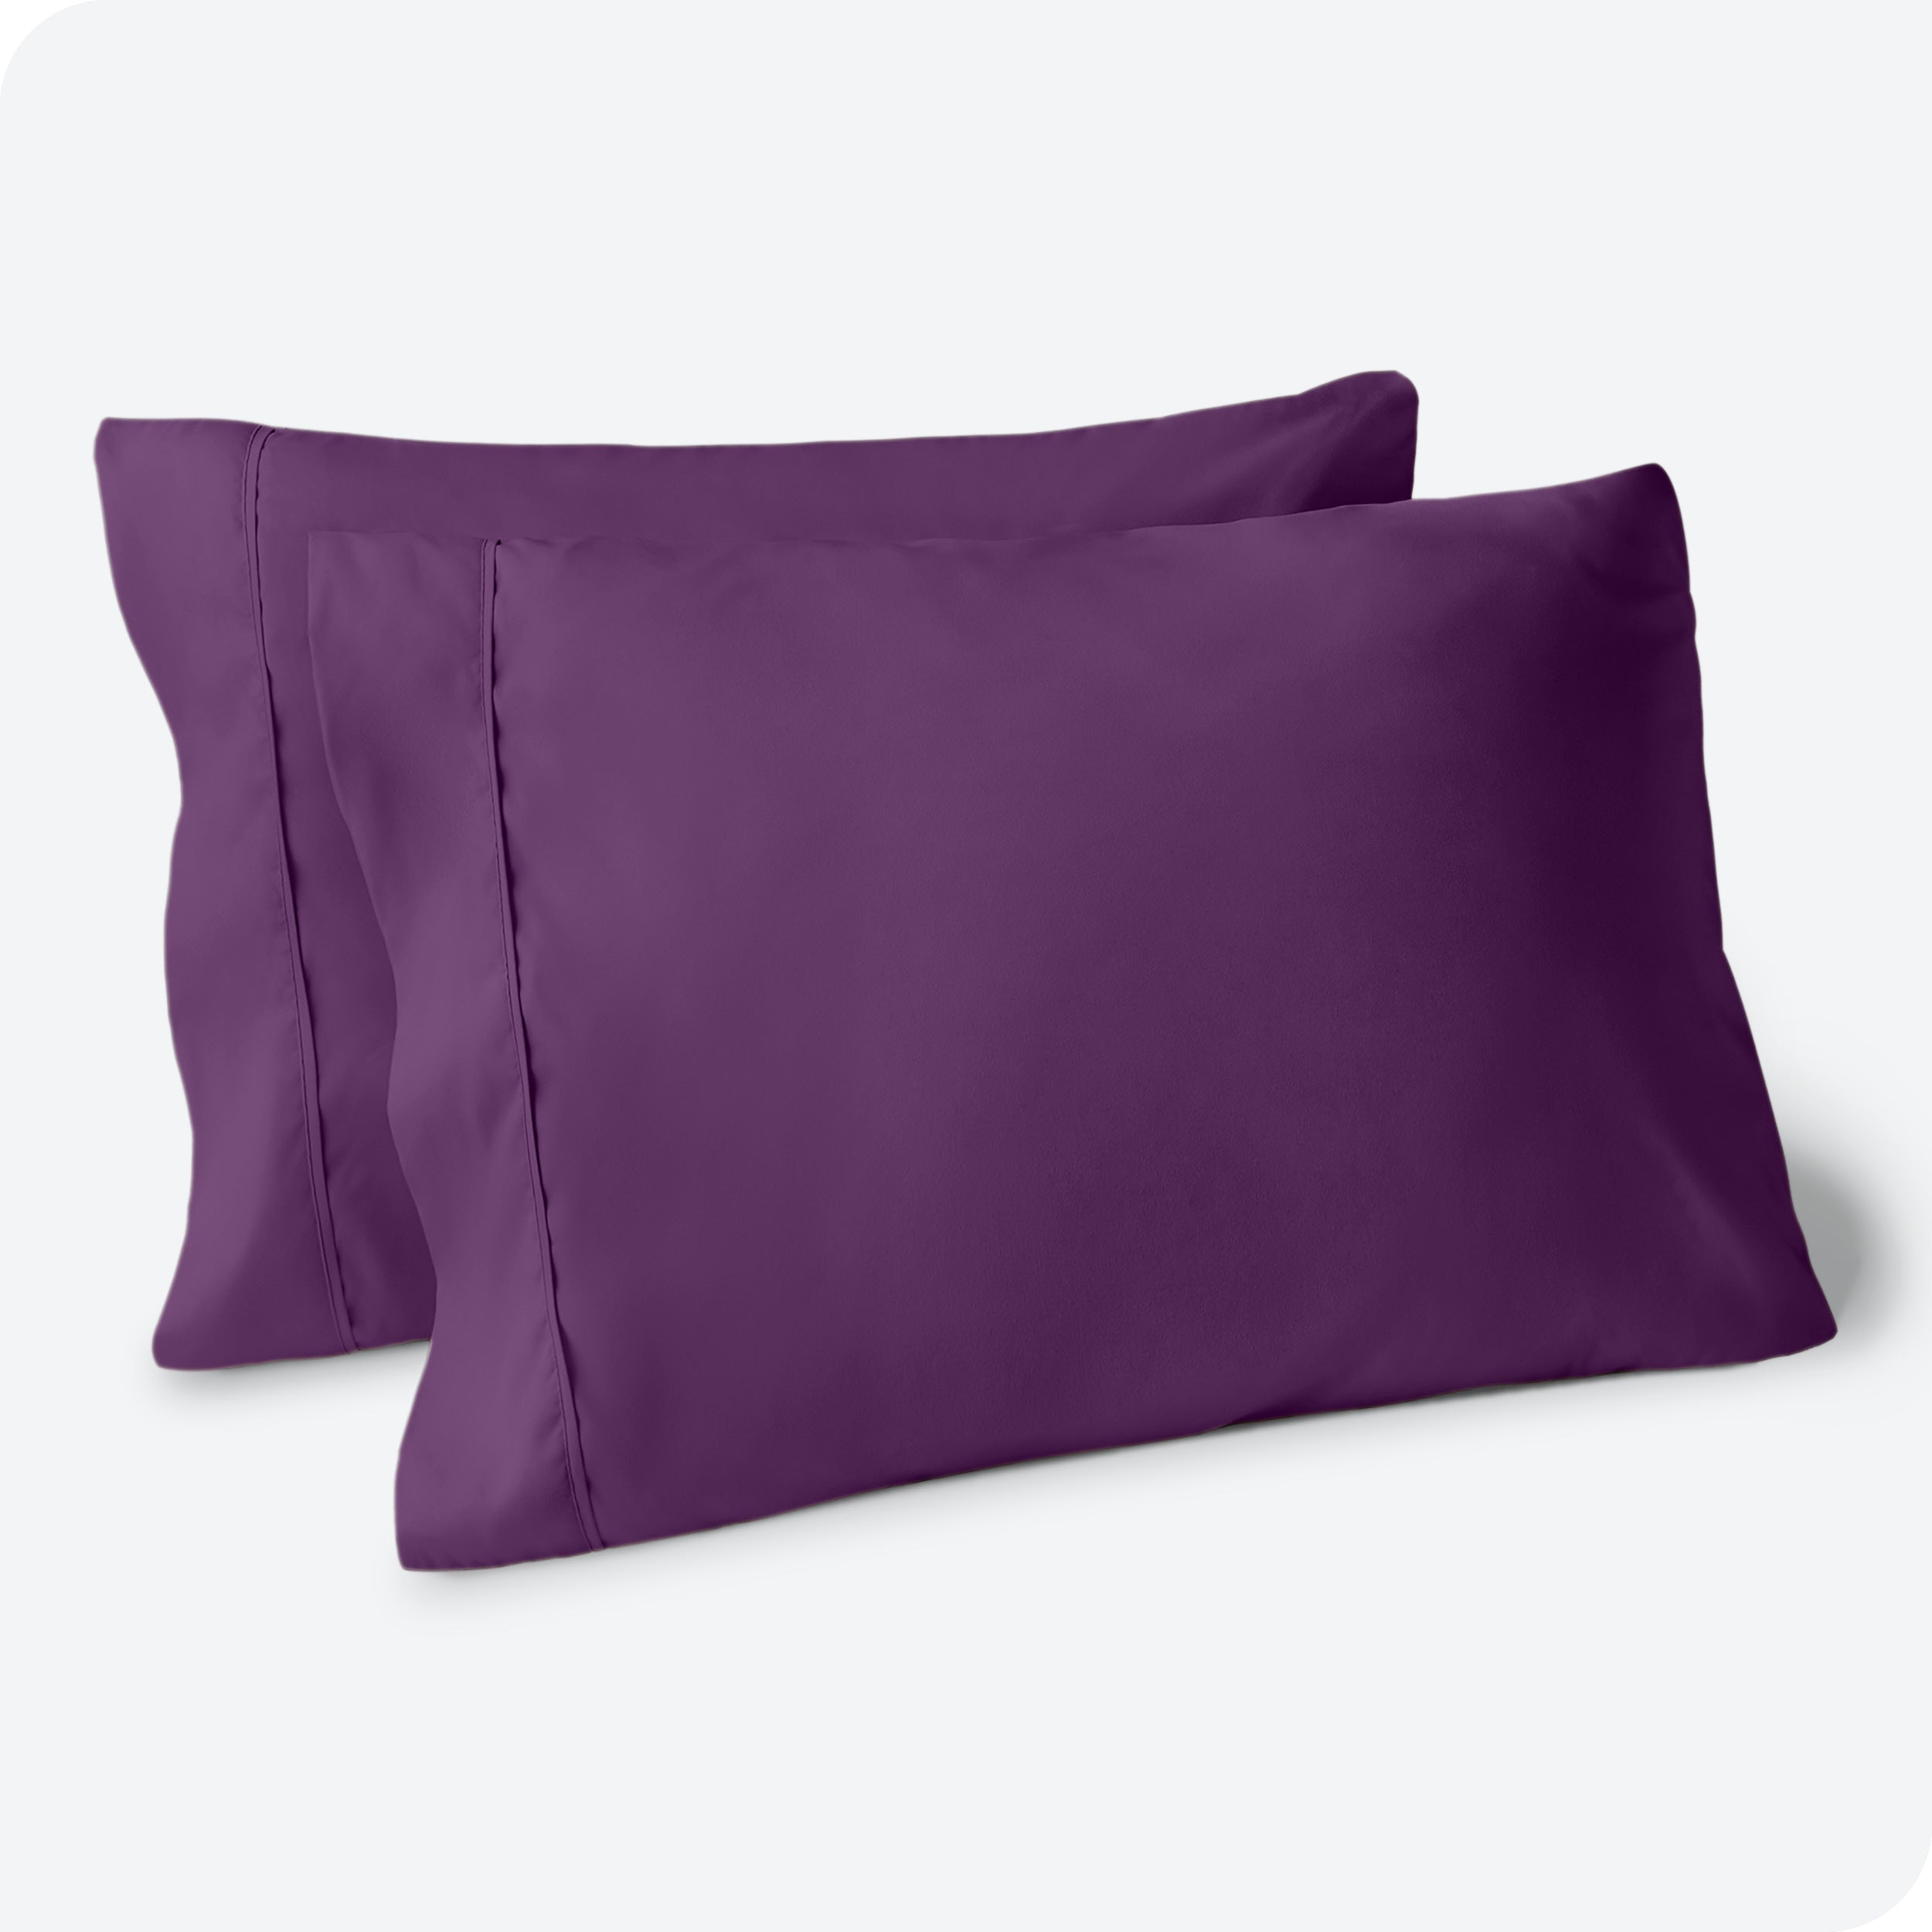 Two pillows on a white background with purple pillowcases on them